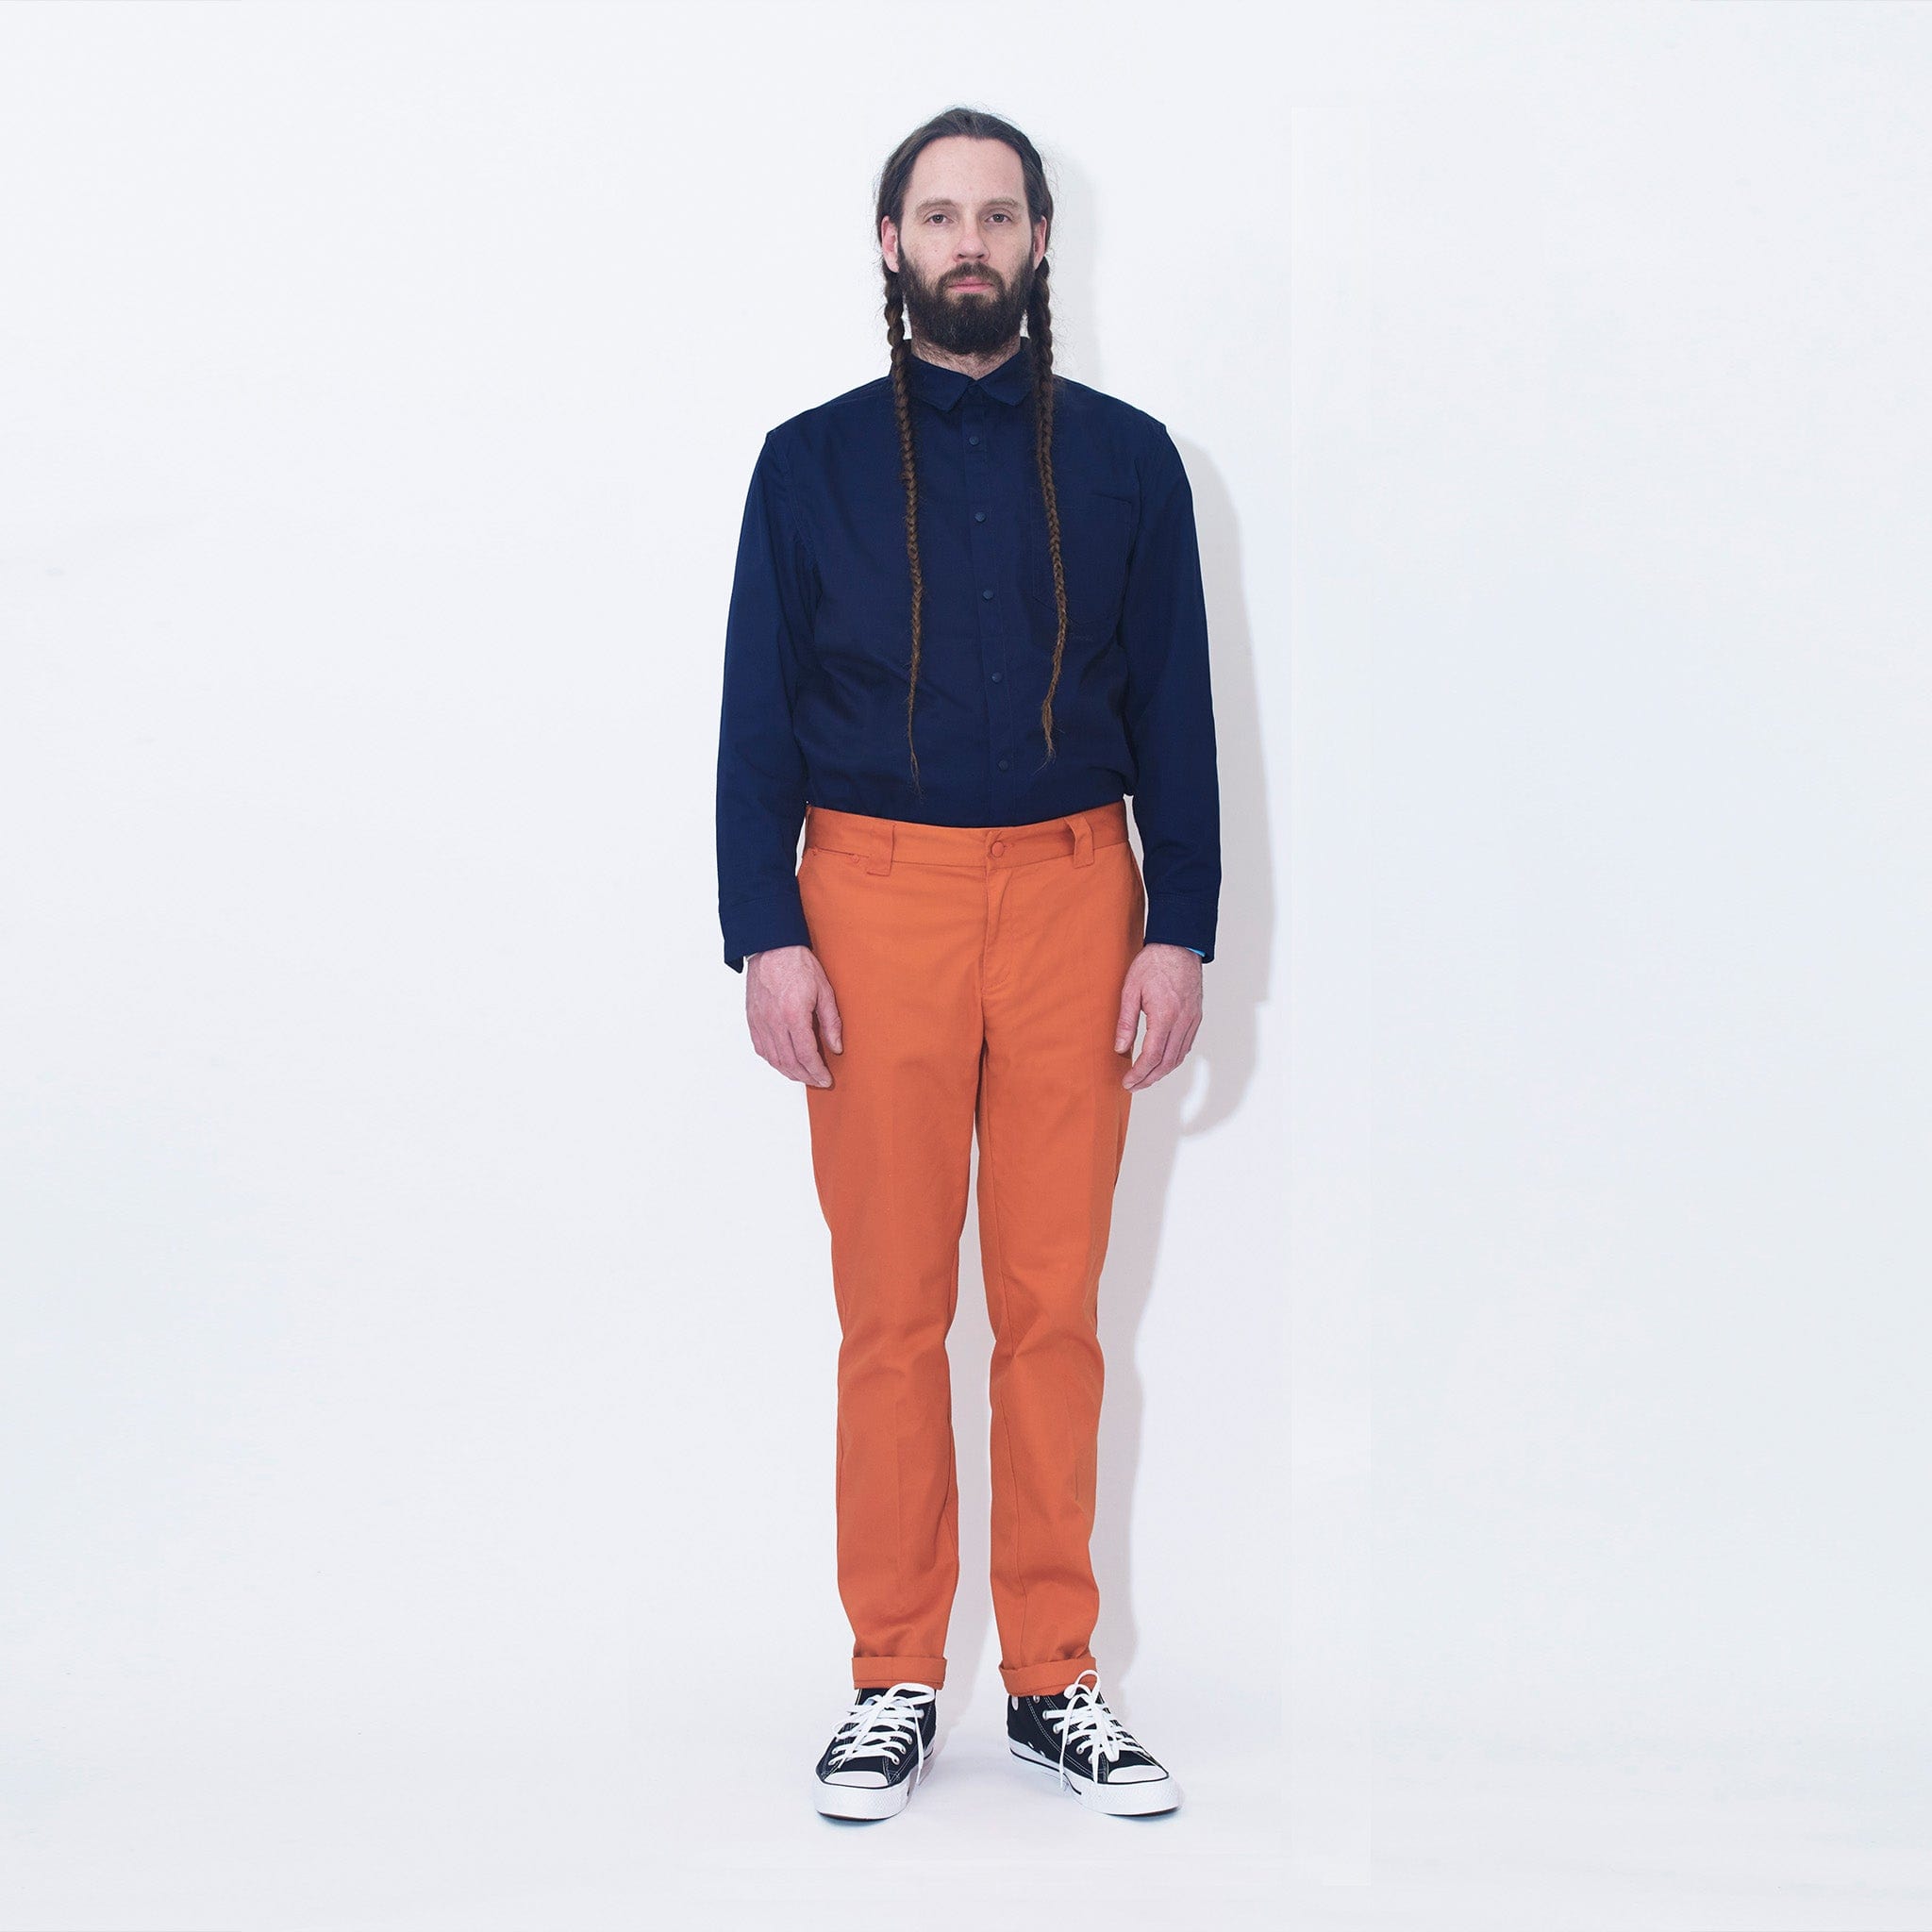 M.C.O's Navy Blue Snap Shirt Paired With Orange Work Trousers.